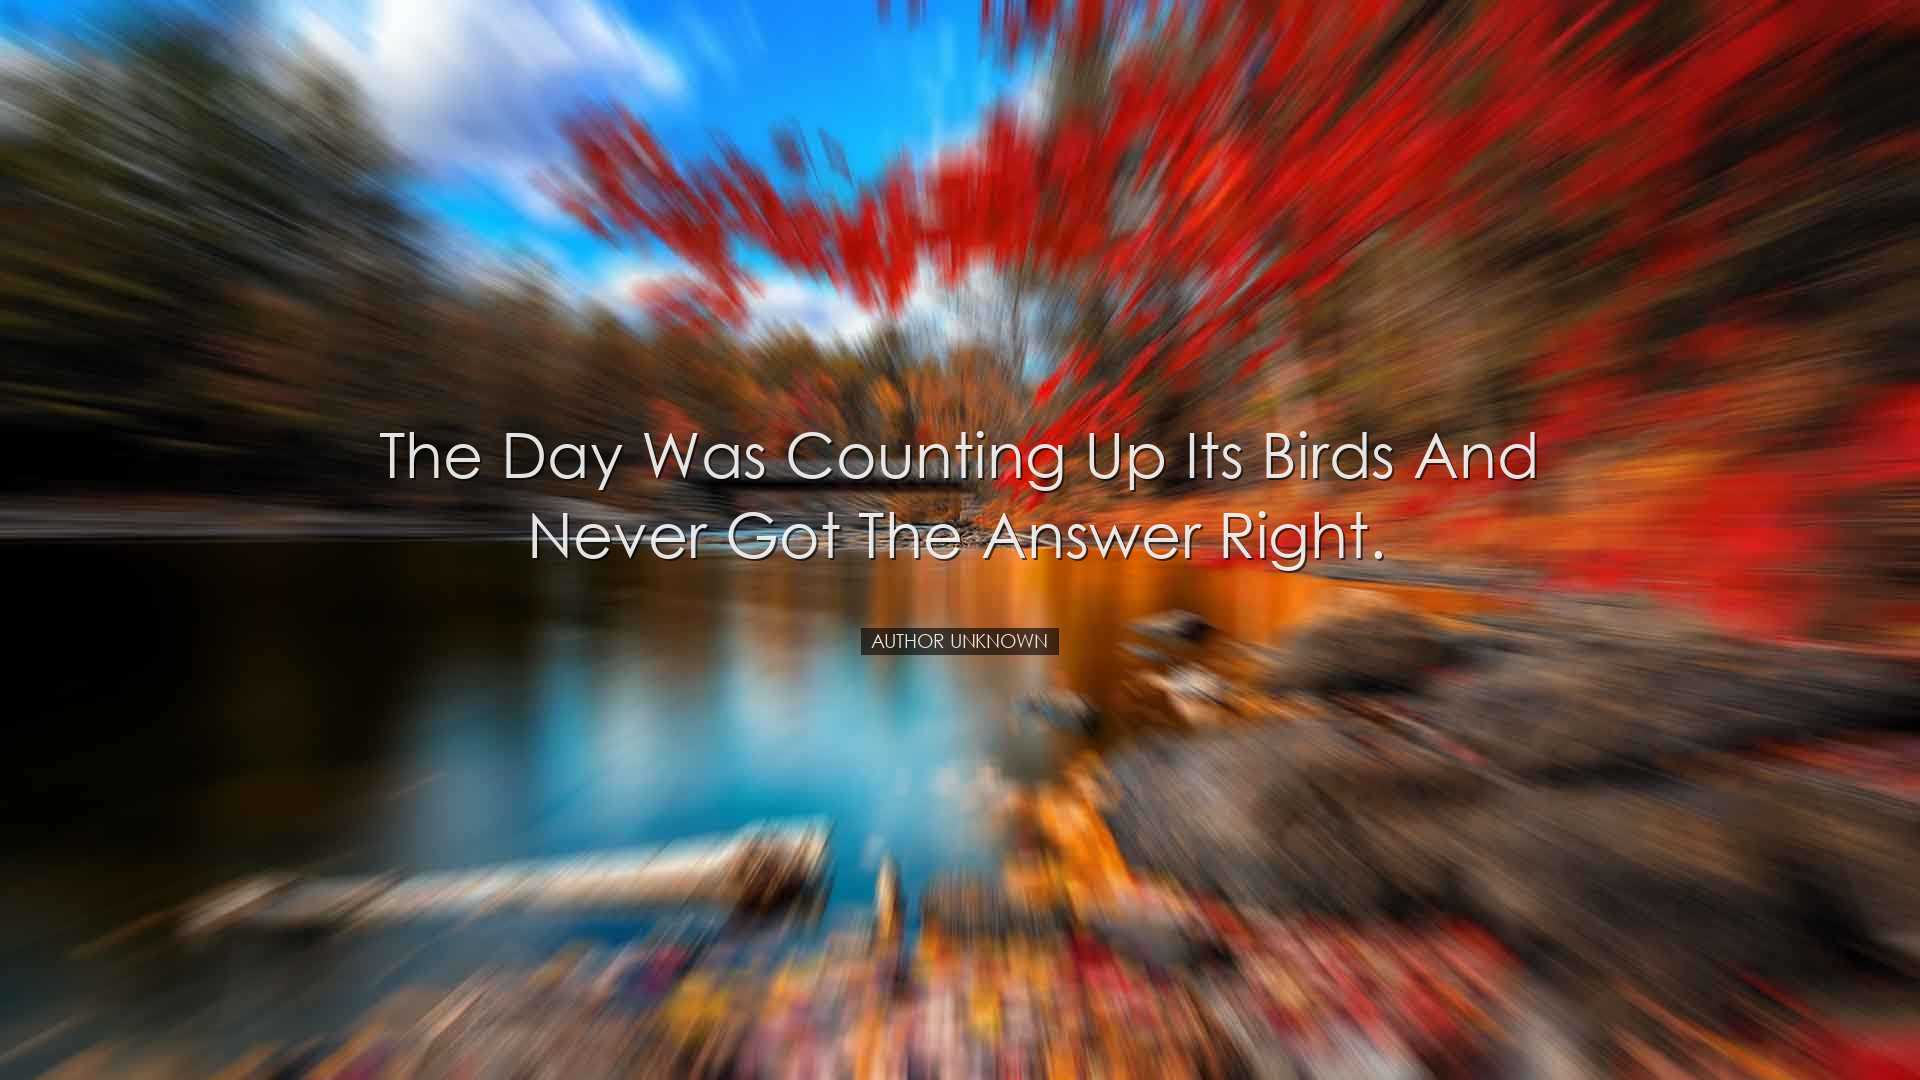 The day was counting up its birds and never got the answer right.